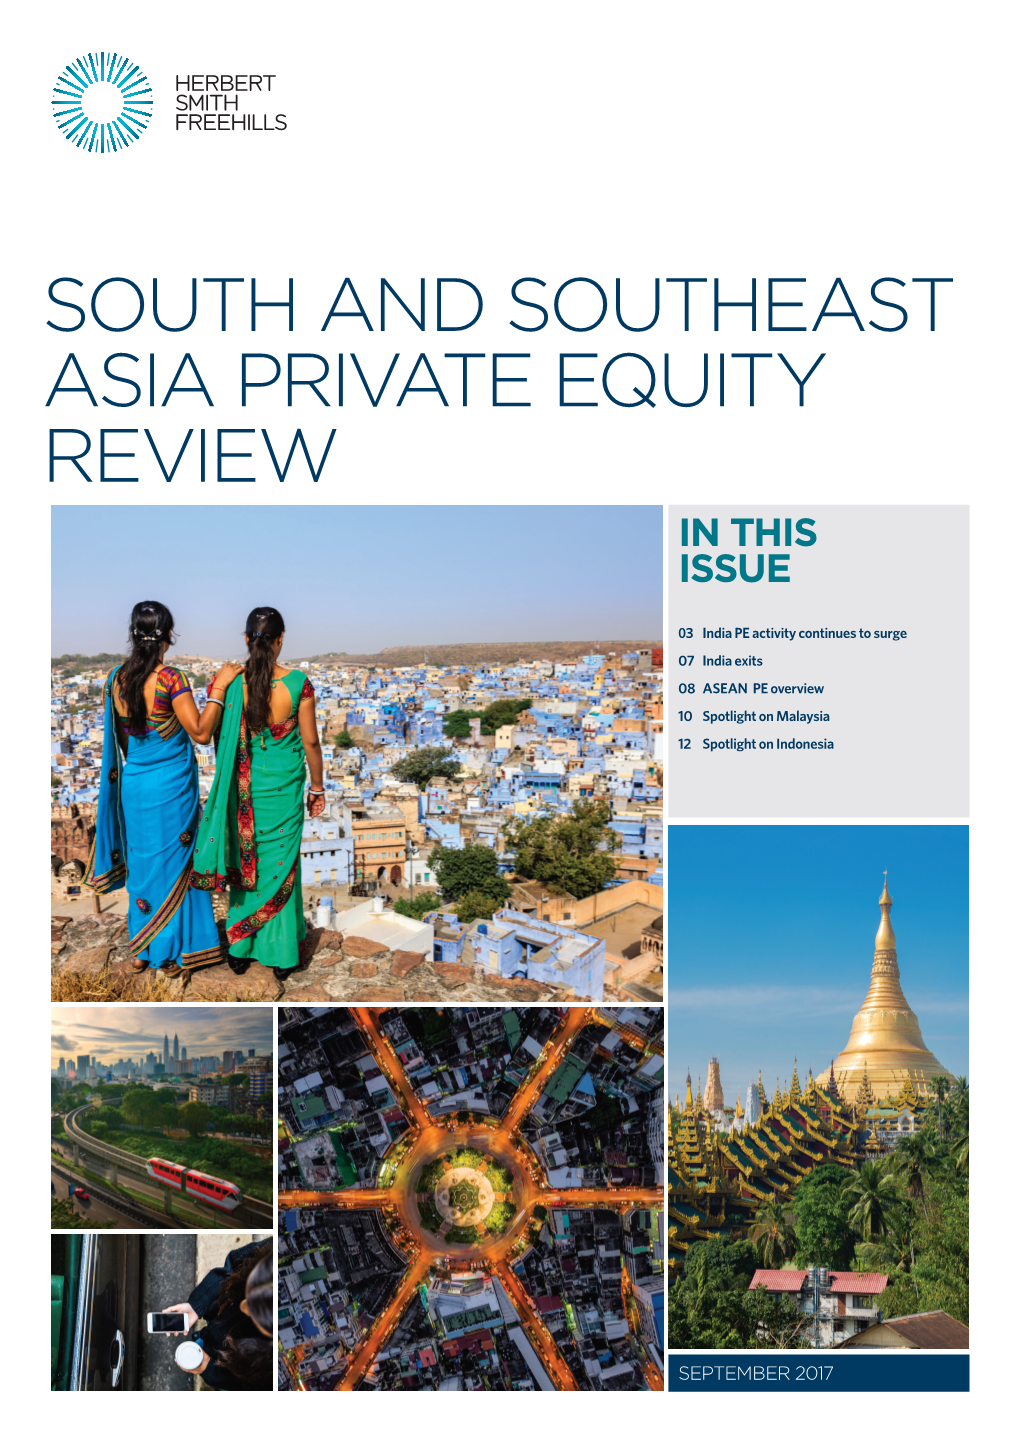 South and Southeast Asia Private Equity Review in This Issue